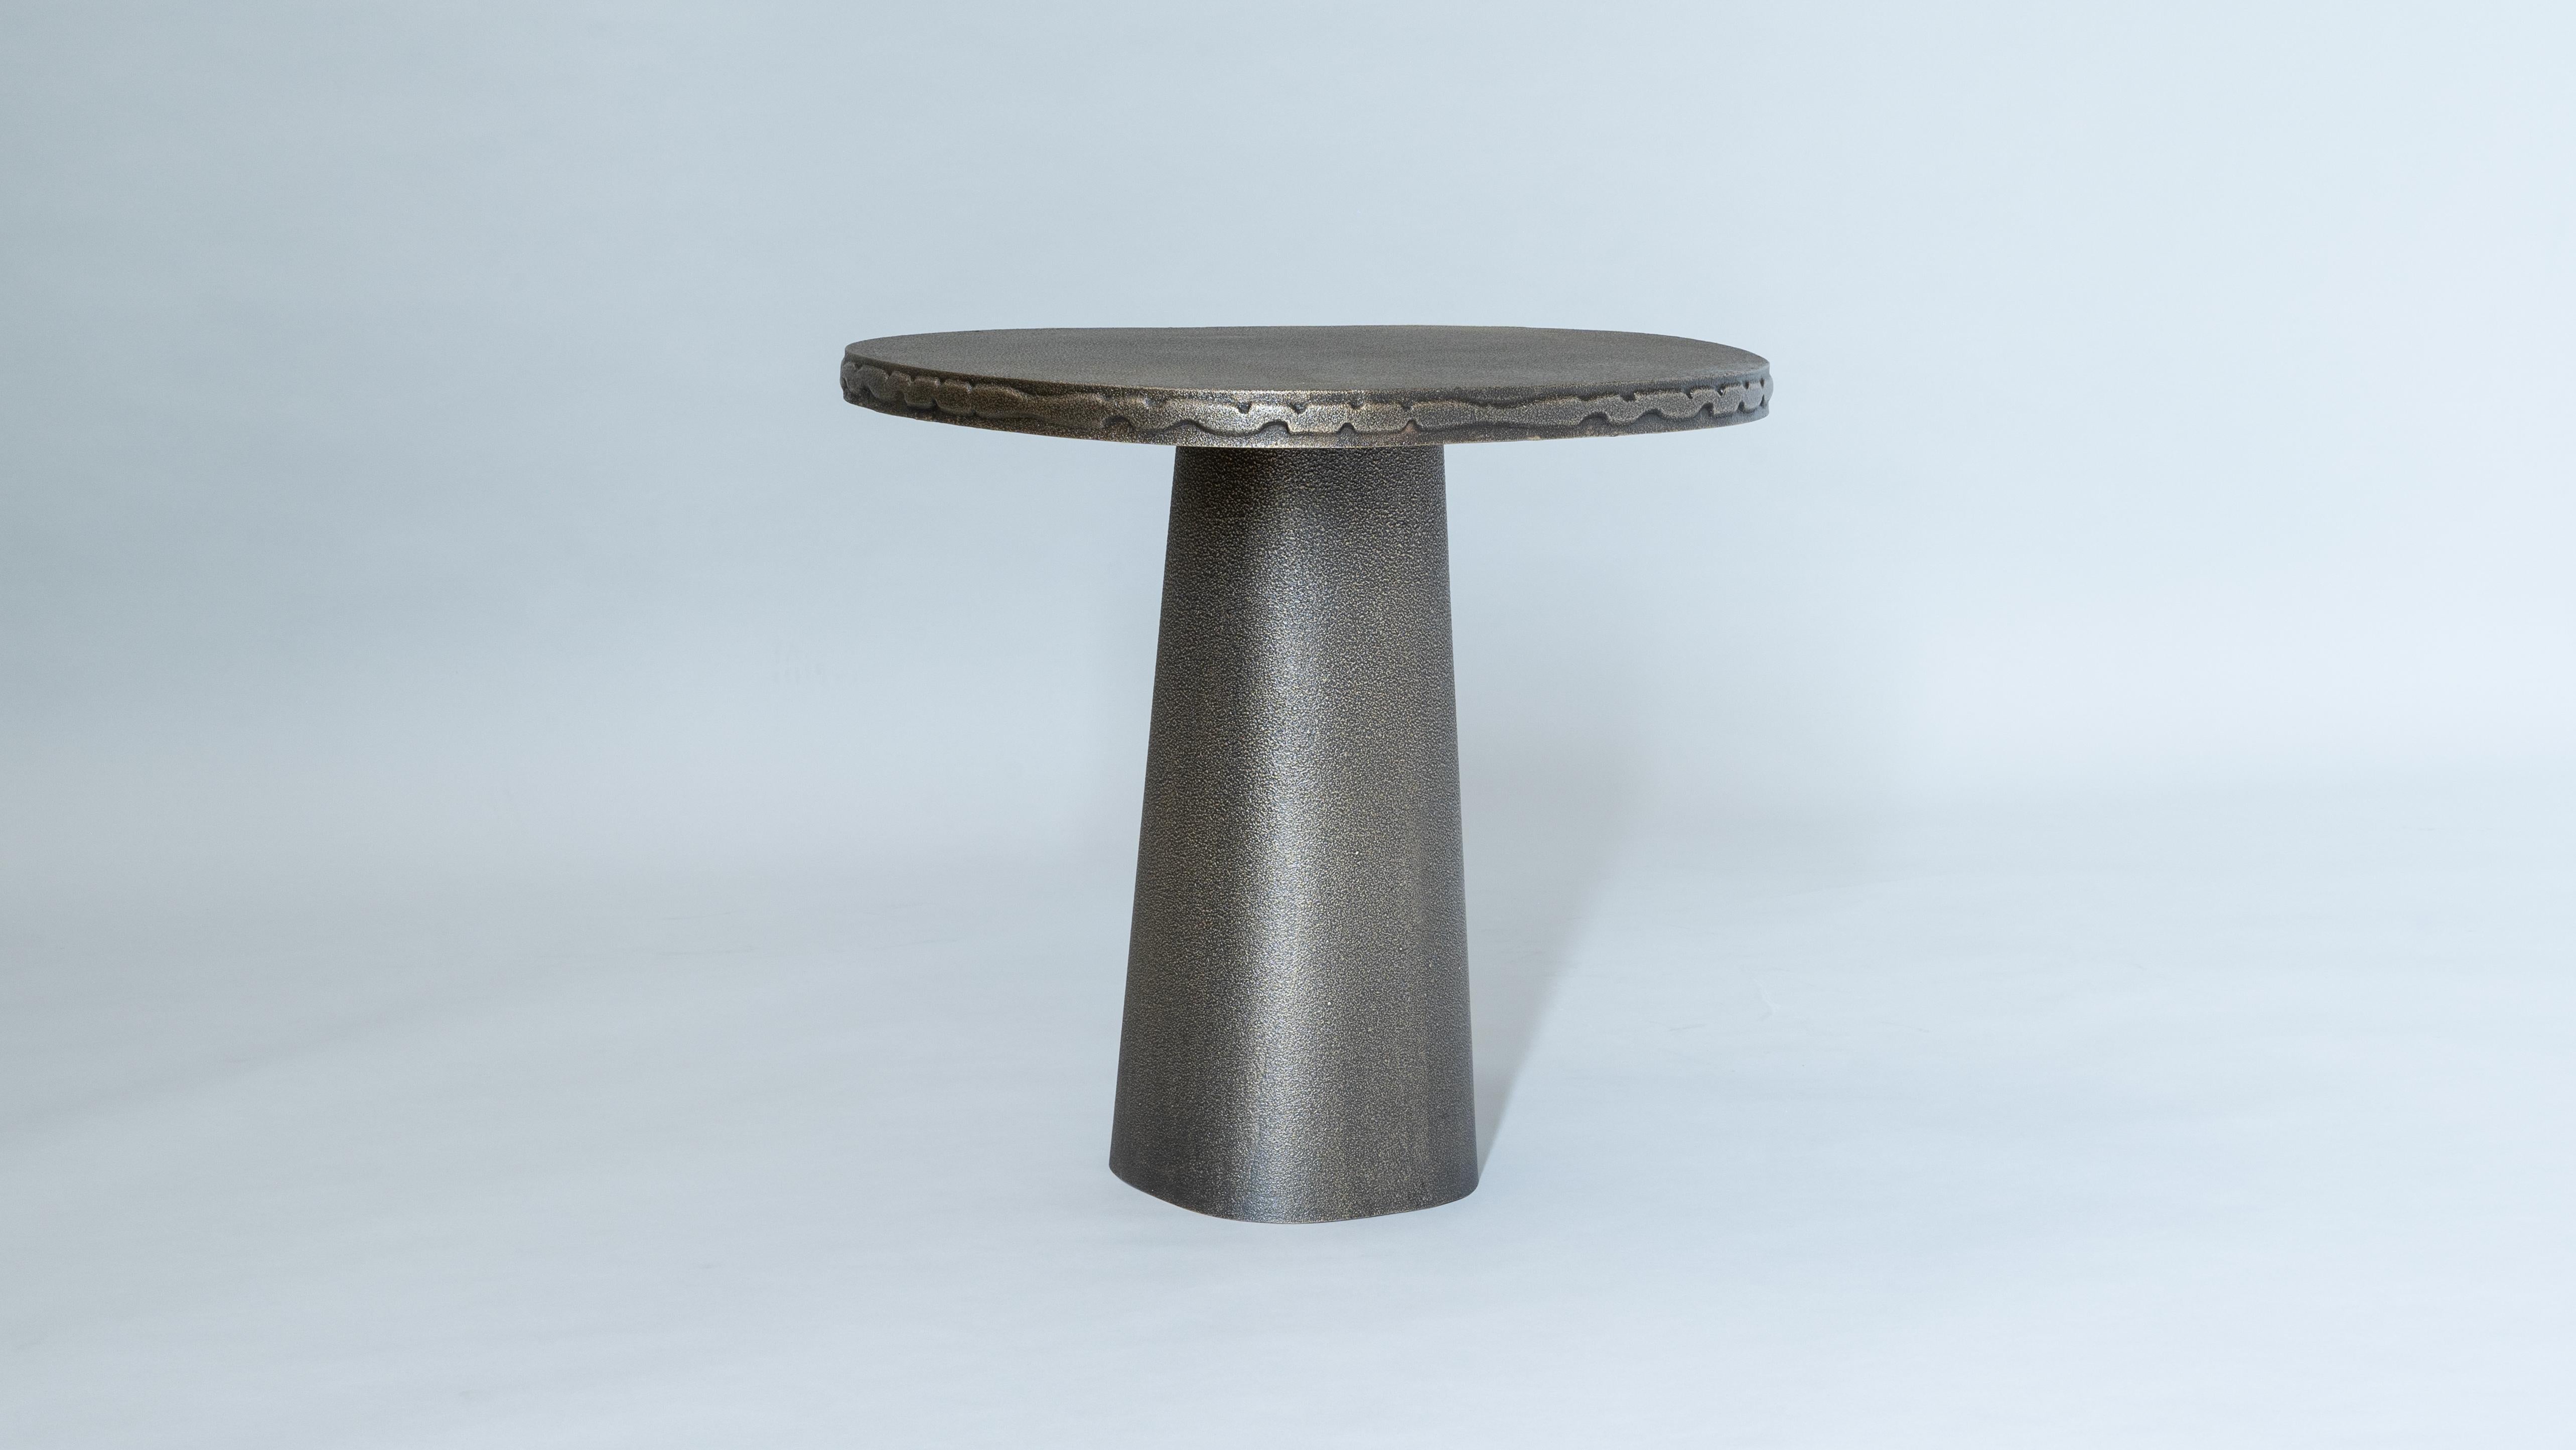 Cast entirely in bronze, the Badal Side Table is a study in the textural possibilities of metals, realized with intricate surface patterns and a raised band of decorative patterning on it’s edge.